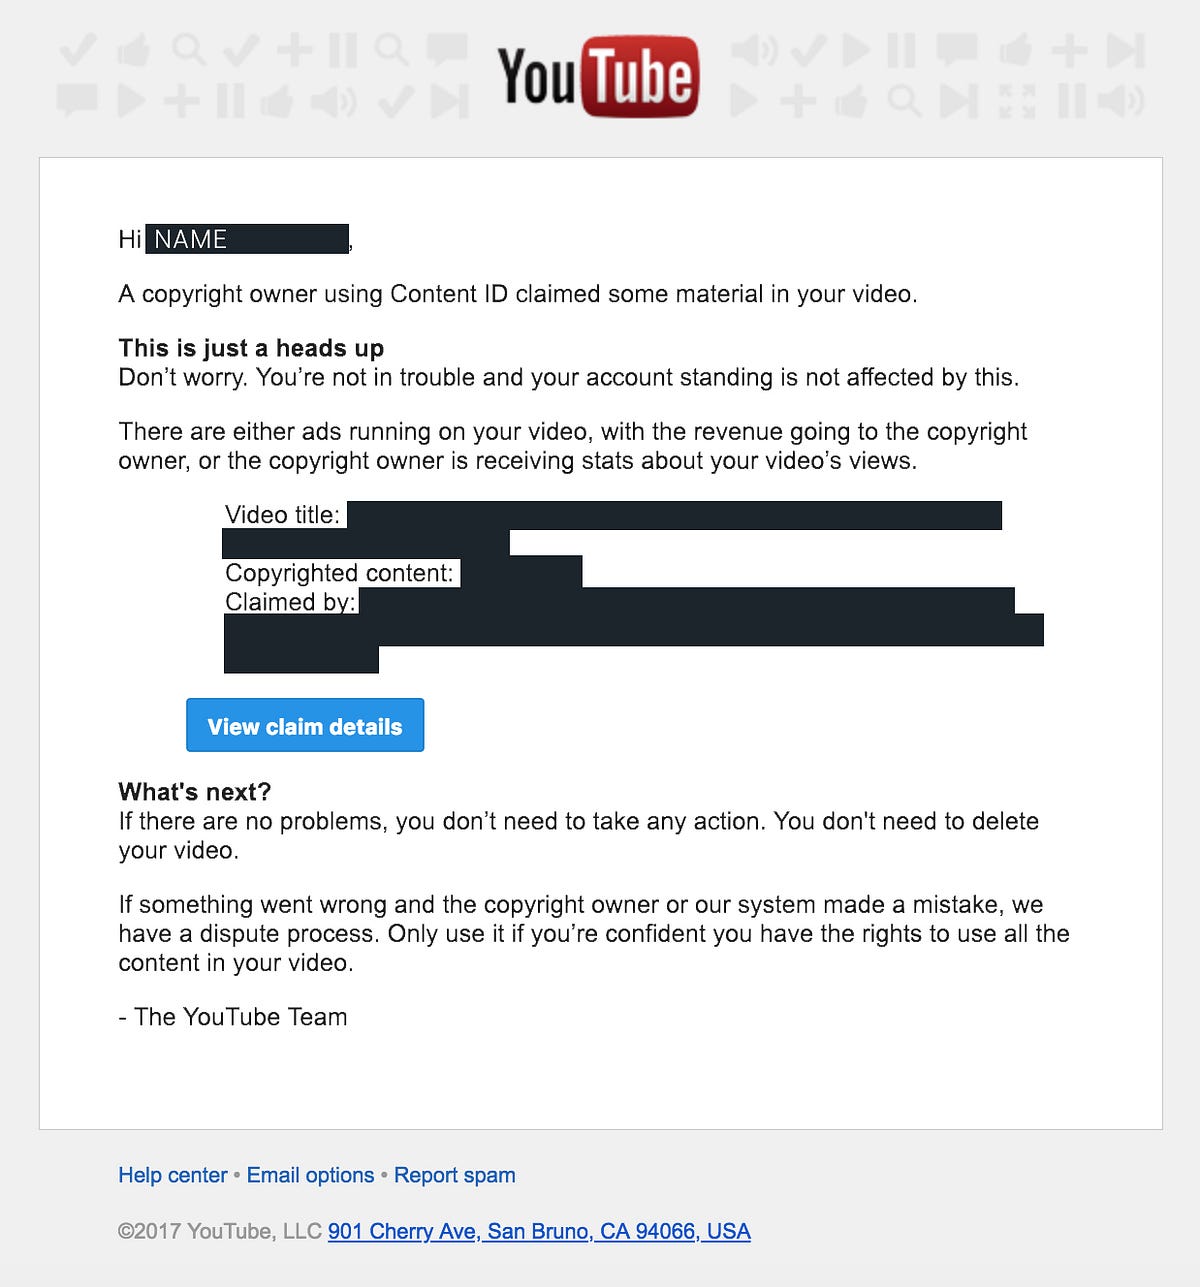 So you just received a copyright claim on your YouTube video  by